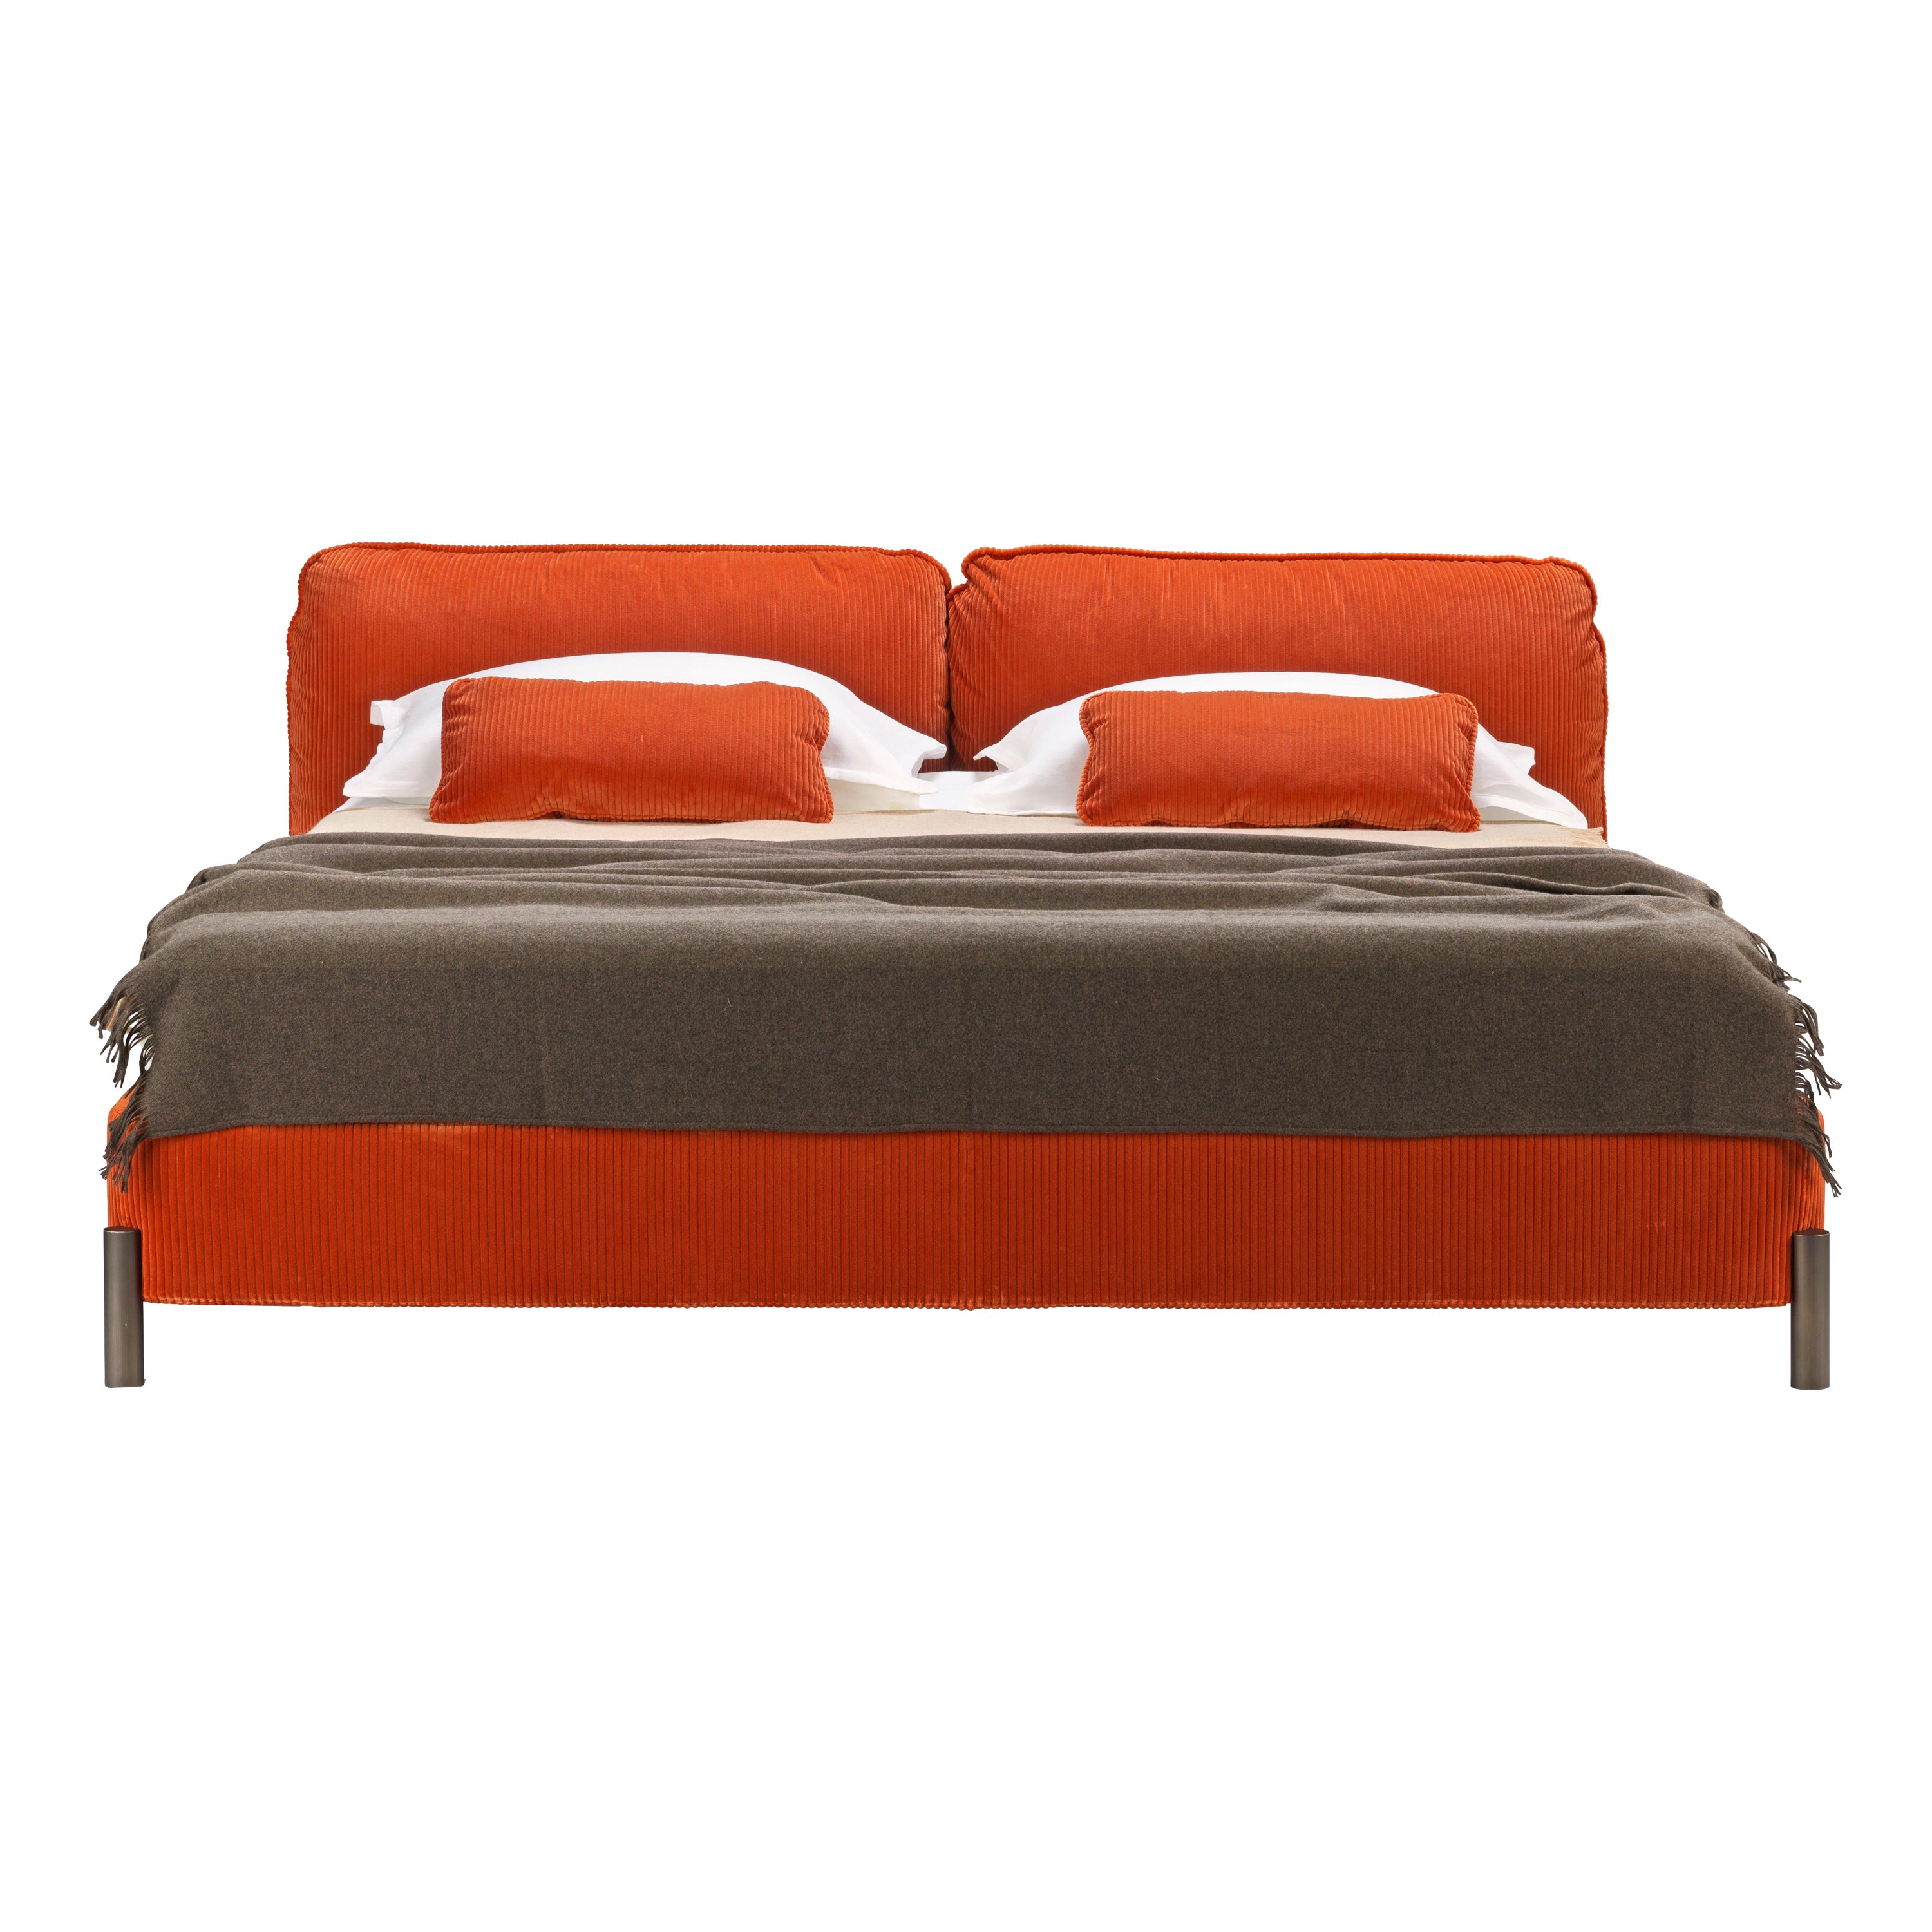 Tarantino Bed in Velvet Cord Orange Structure Burnished Brass, Made in Italy For Sale